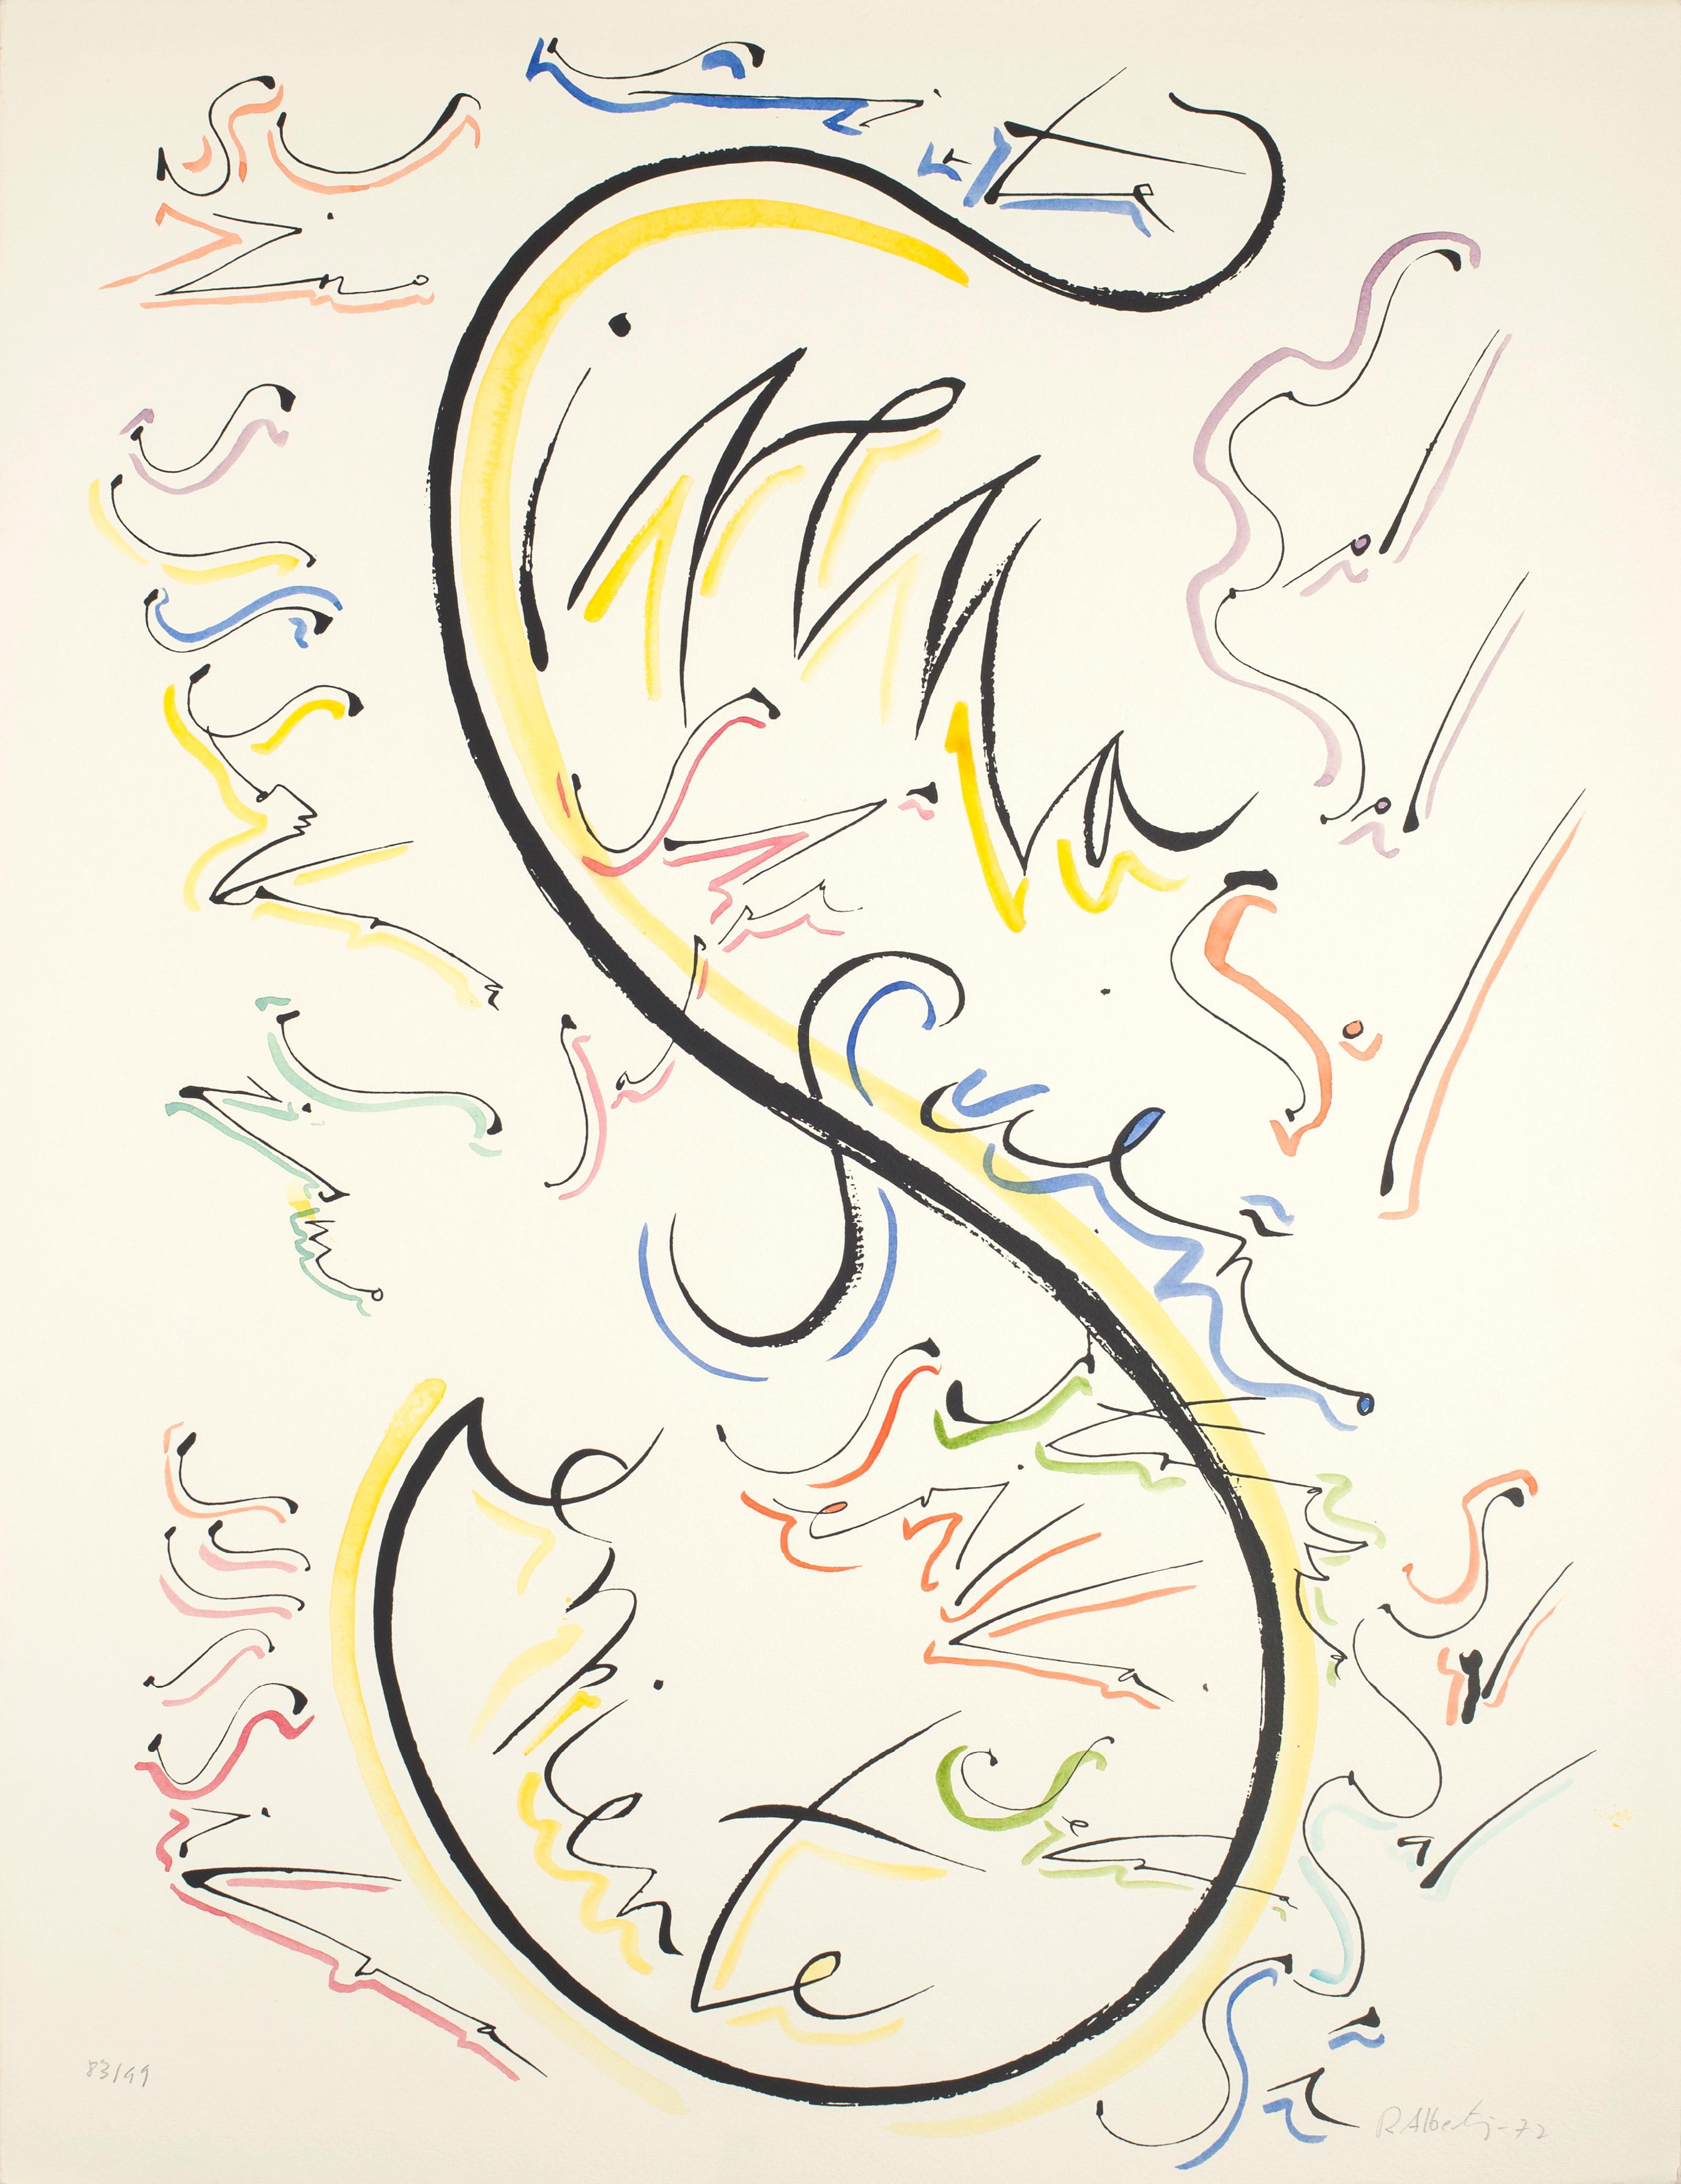 Letter S - Hand-Colored Lithograph by Raphael Alberti - 1972